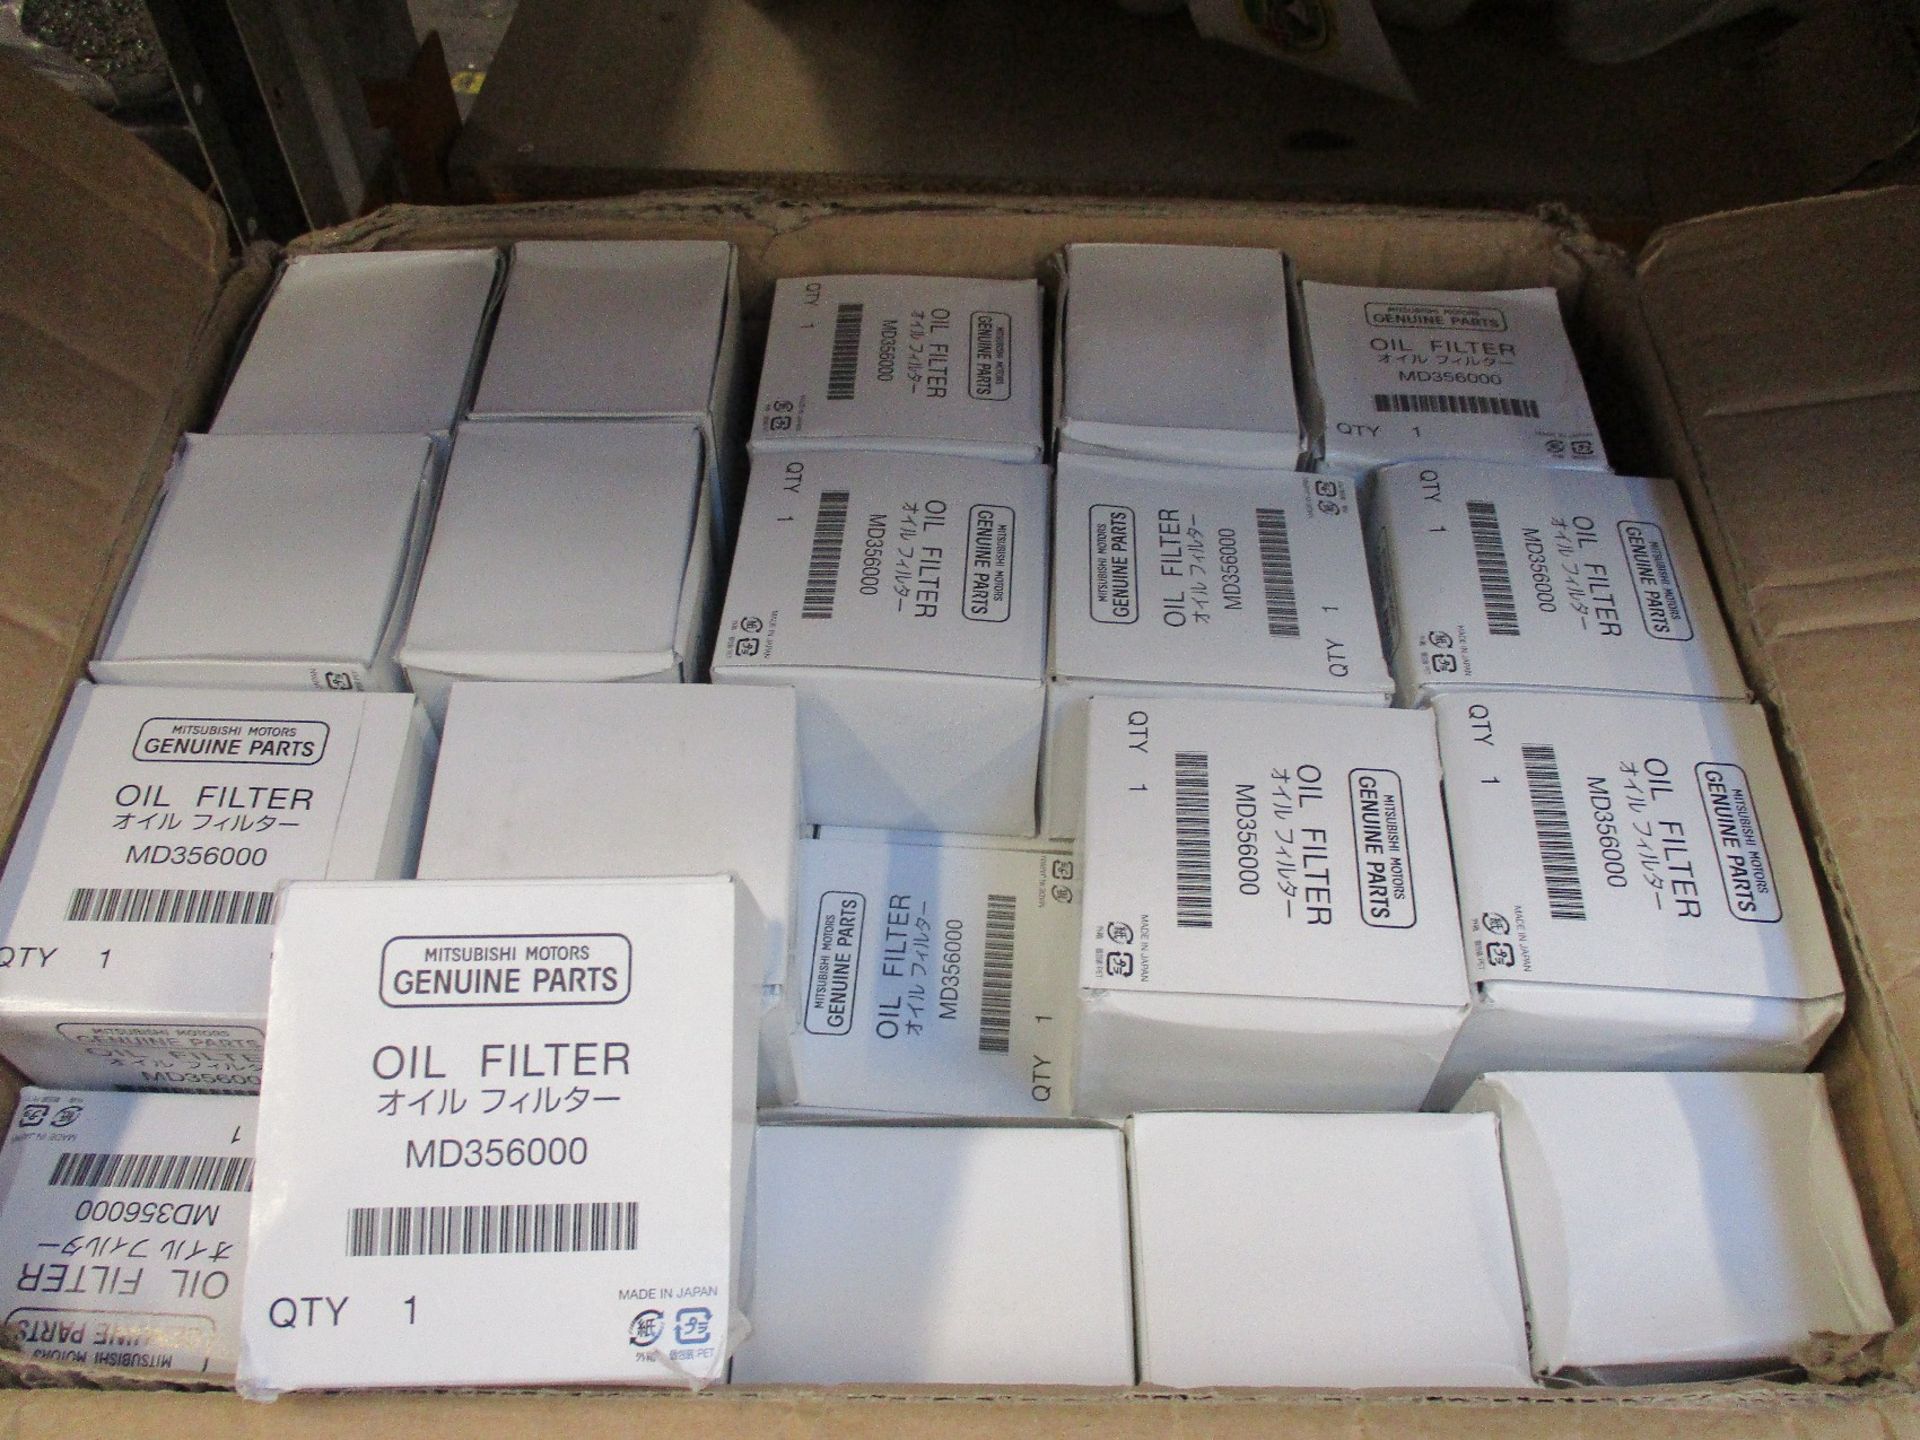 A quantity of boxed as new Mitsubishi Motors Oil Filters (MD356000) (Approximately 45).